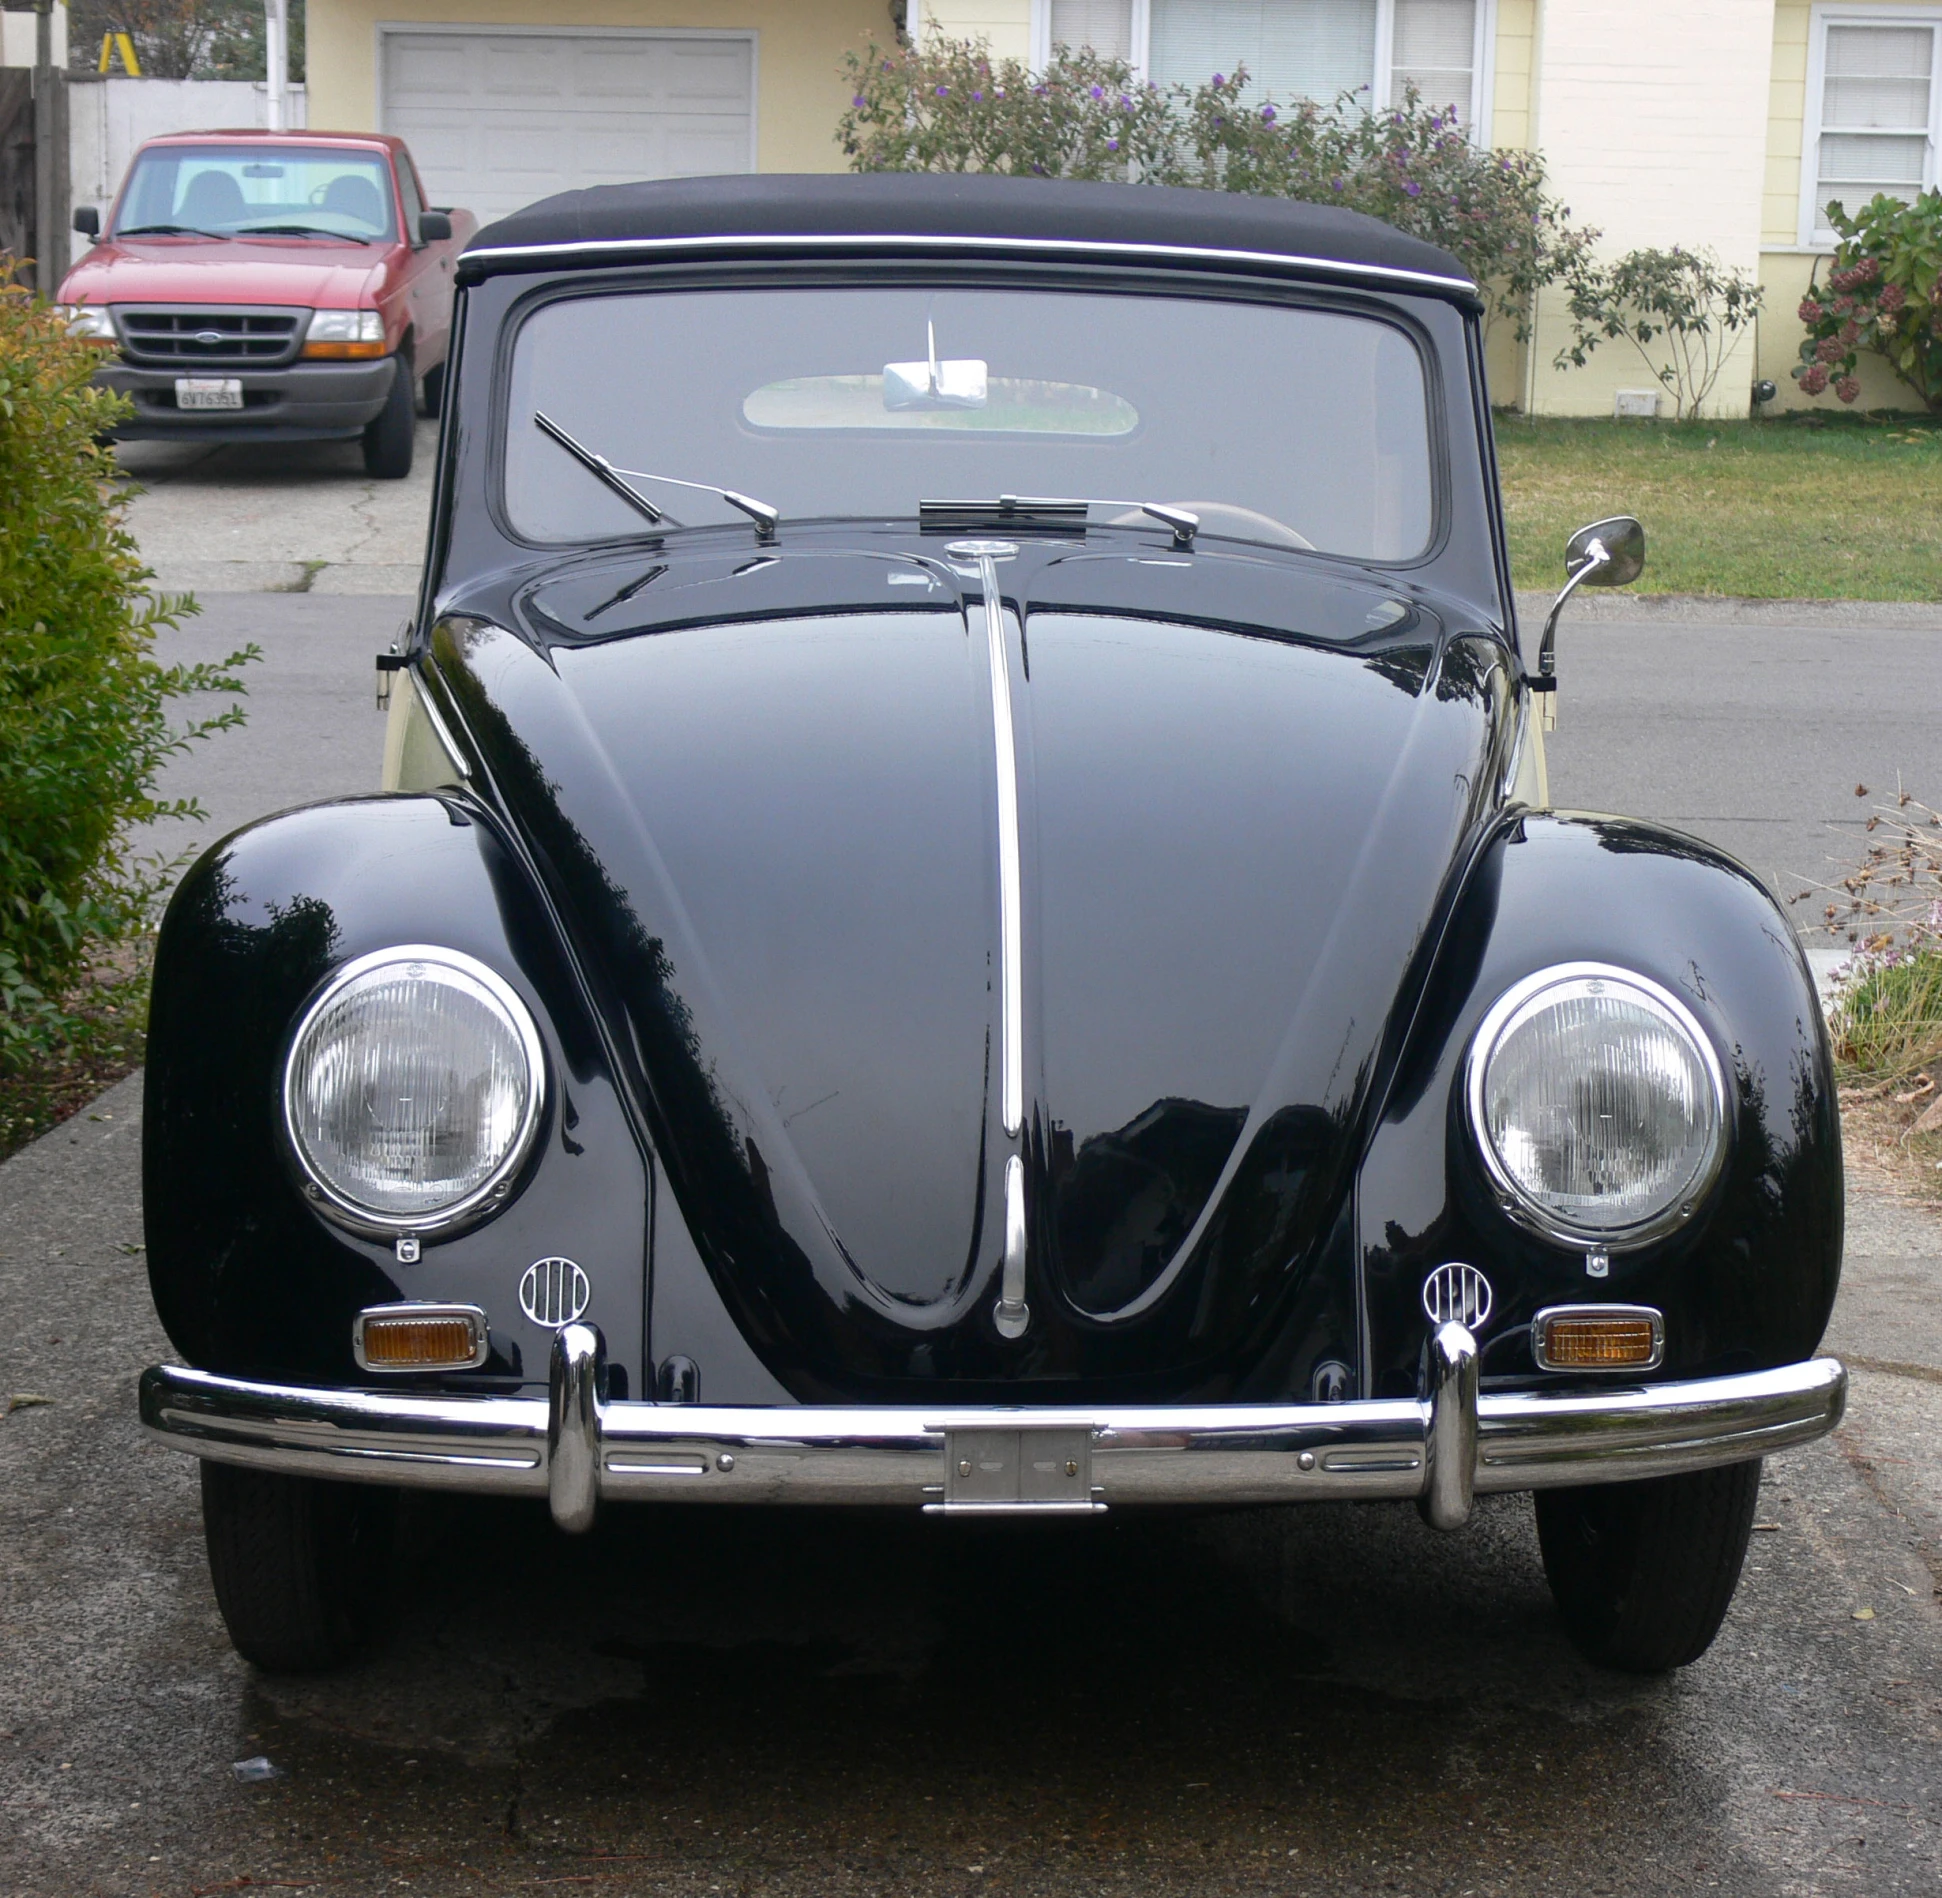 the front view of an old car in the driveway